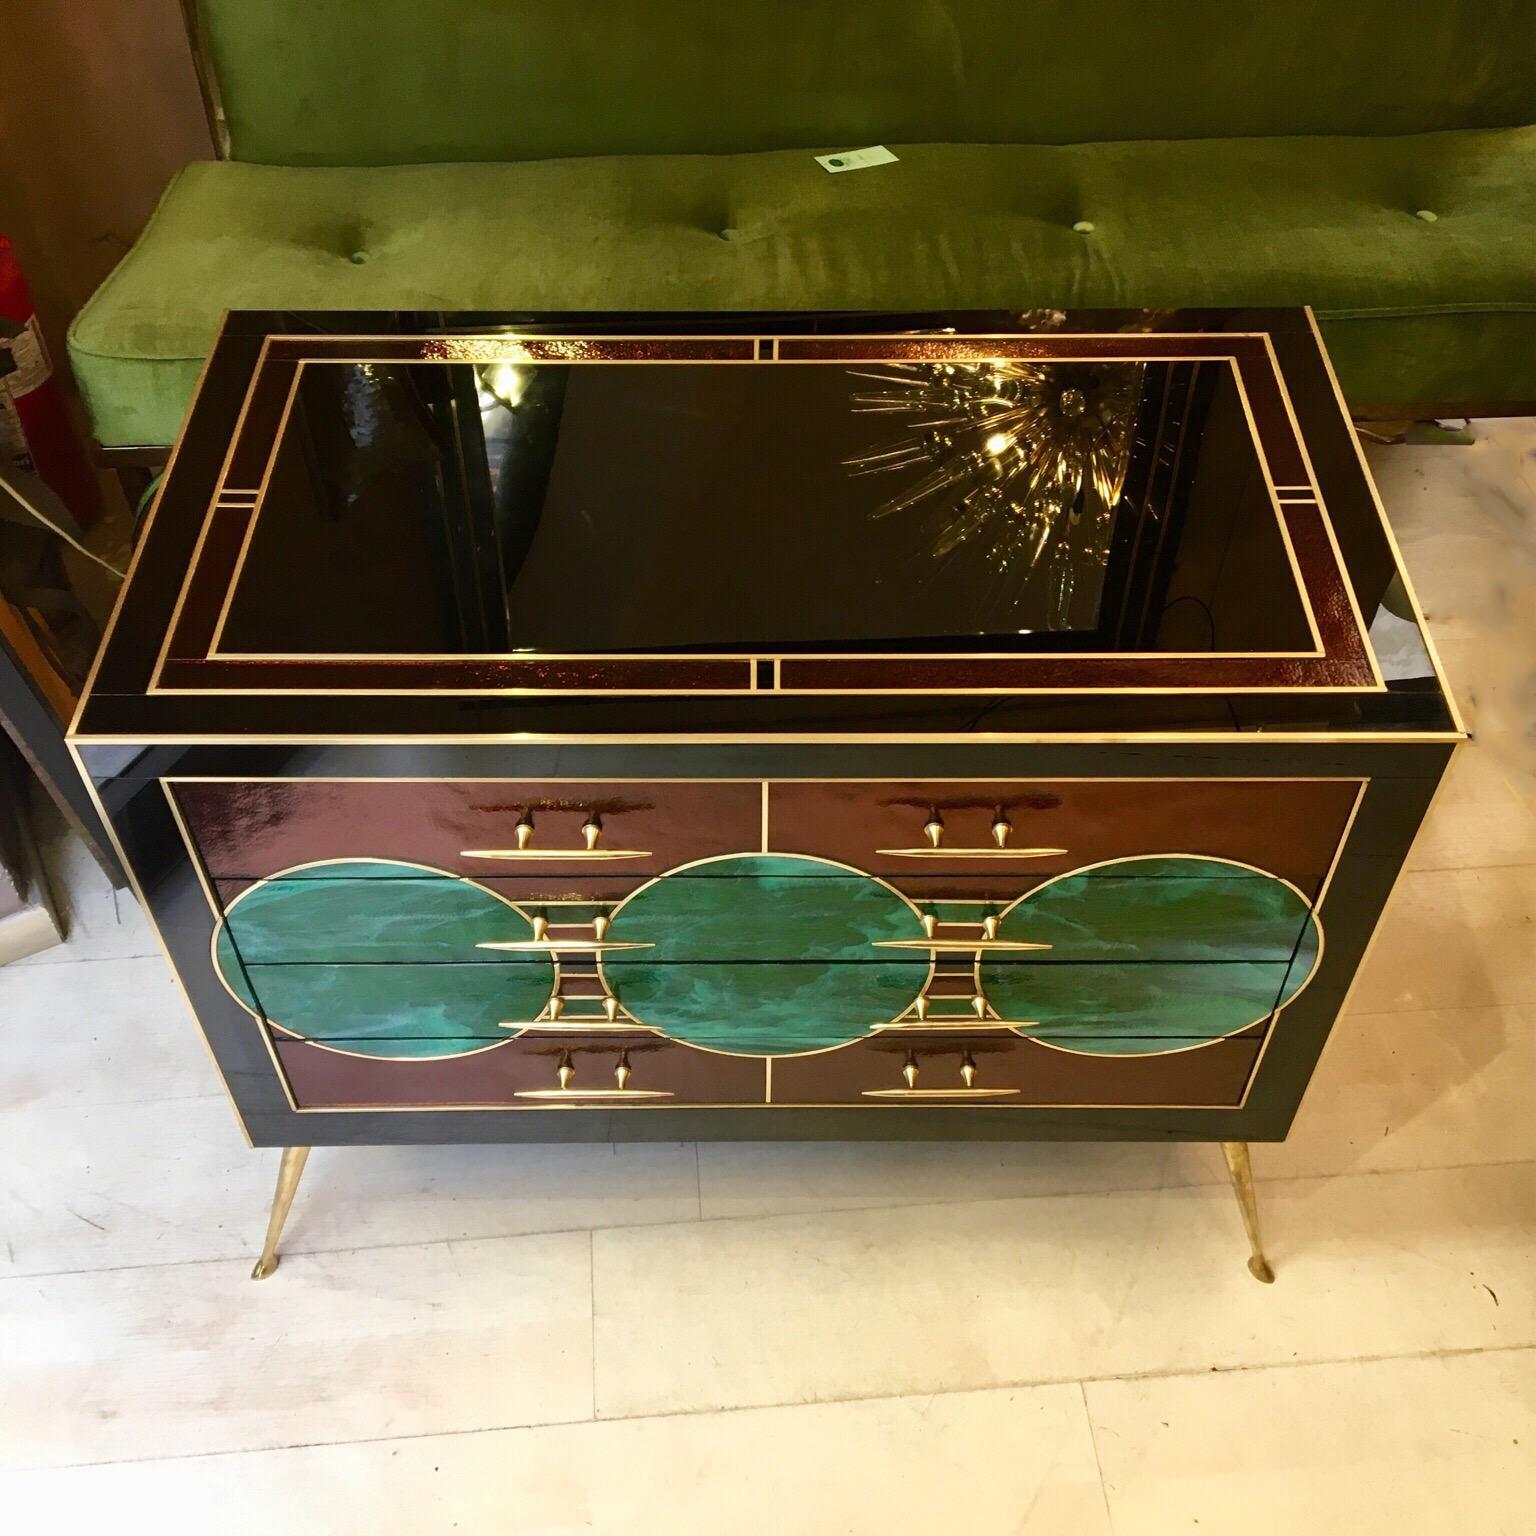 Opaline glass chest of drawers, frontal decoration with green opaline glass circles malachite effect, black and plum color opaline glass top and sides, brass inlays, handels and legs, three drawers.